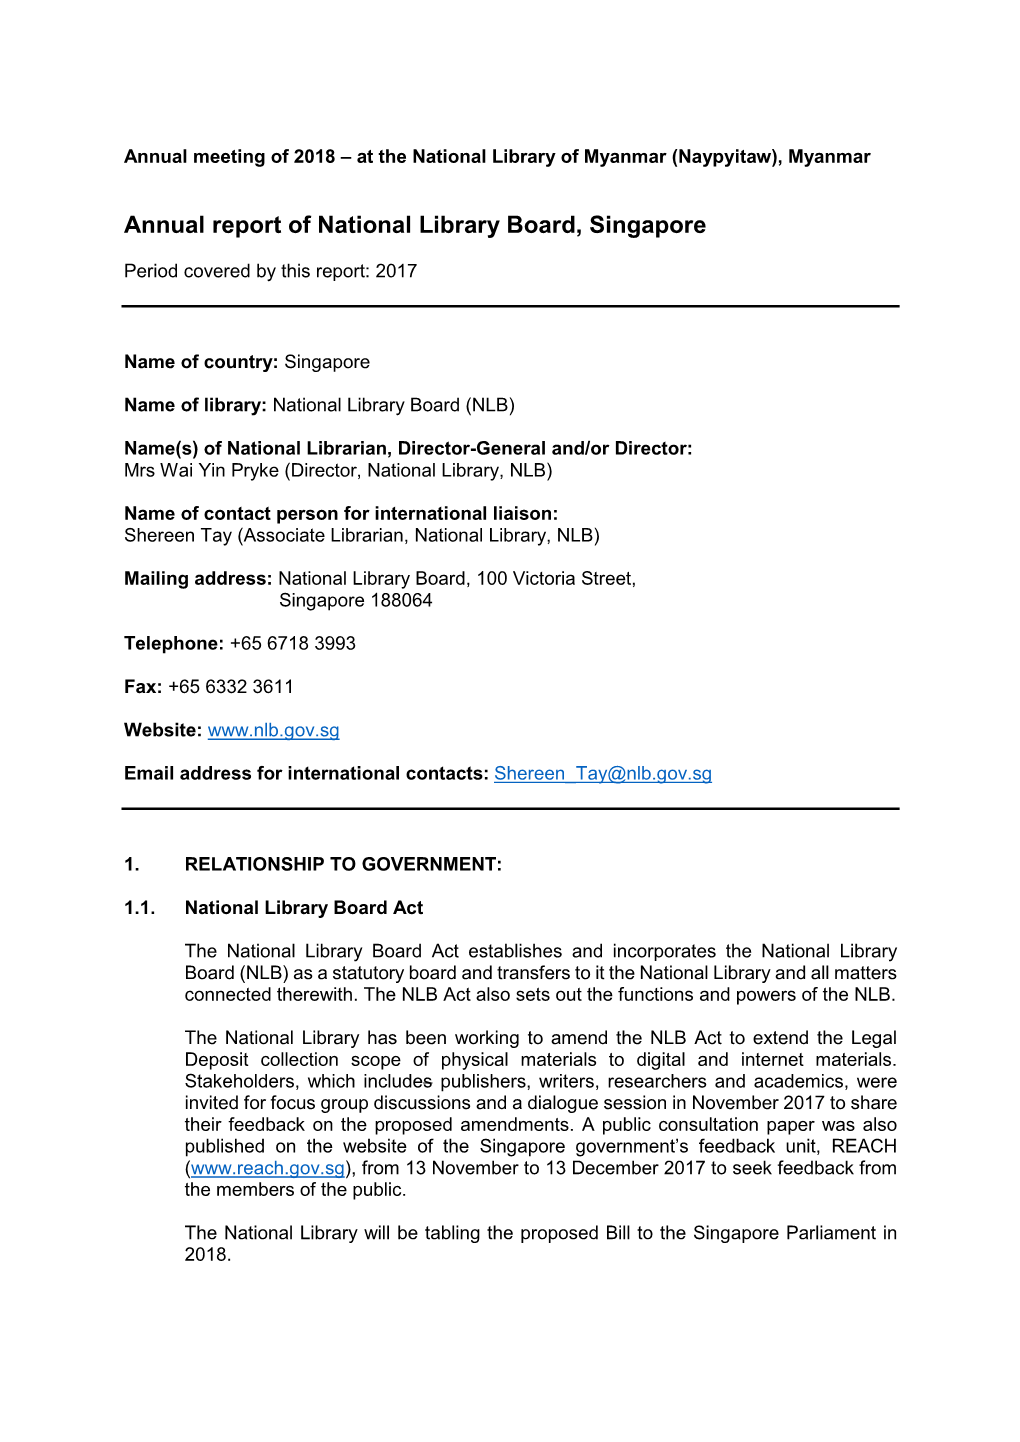 Annual Report of National Library Board, Singapore